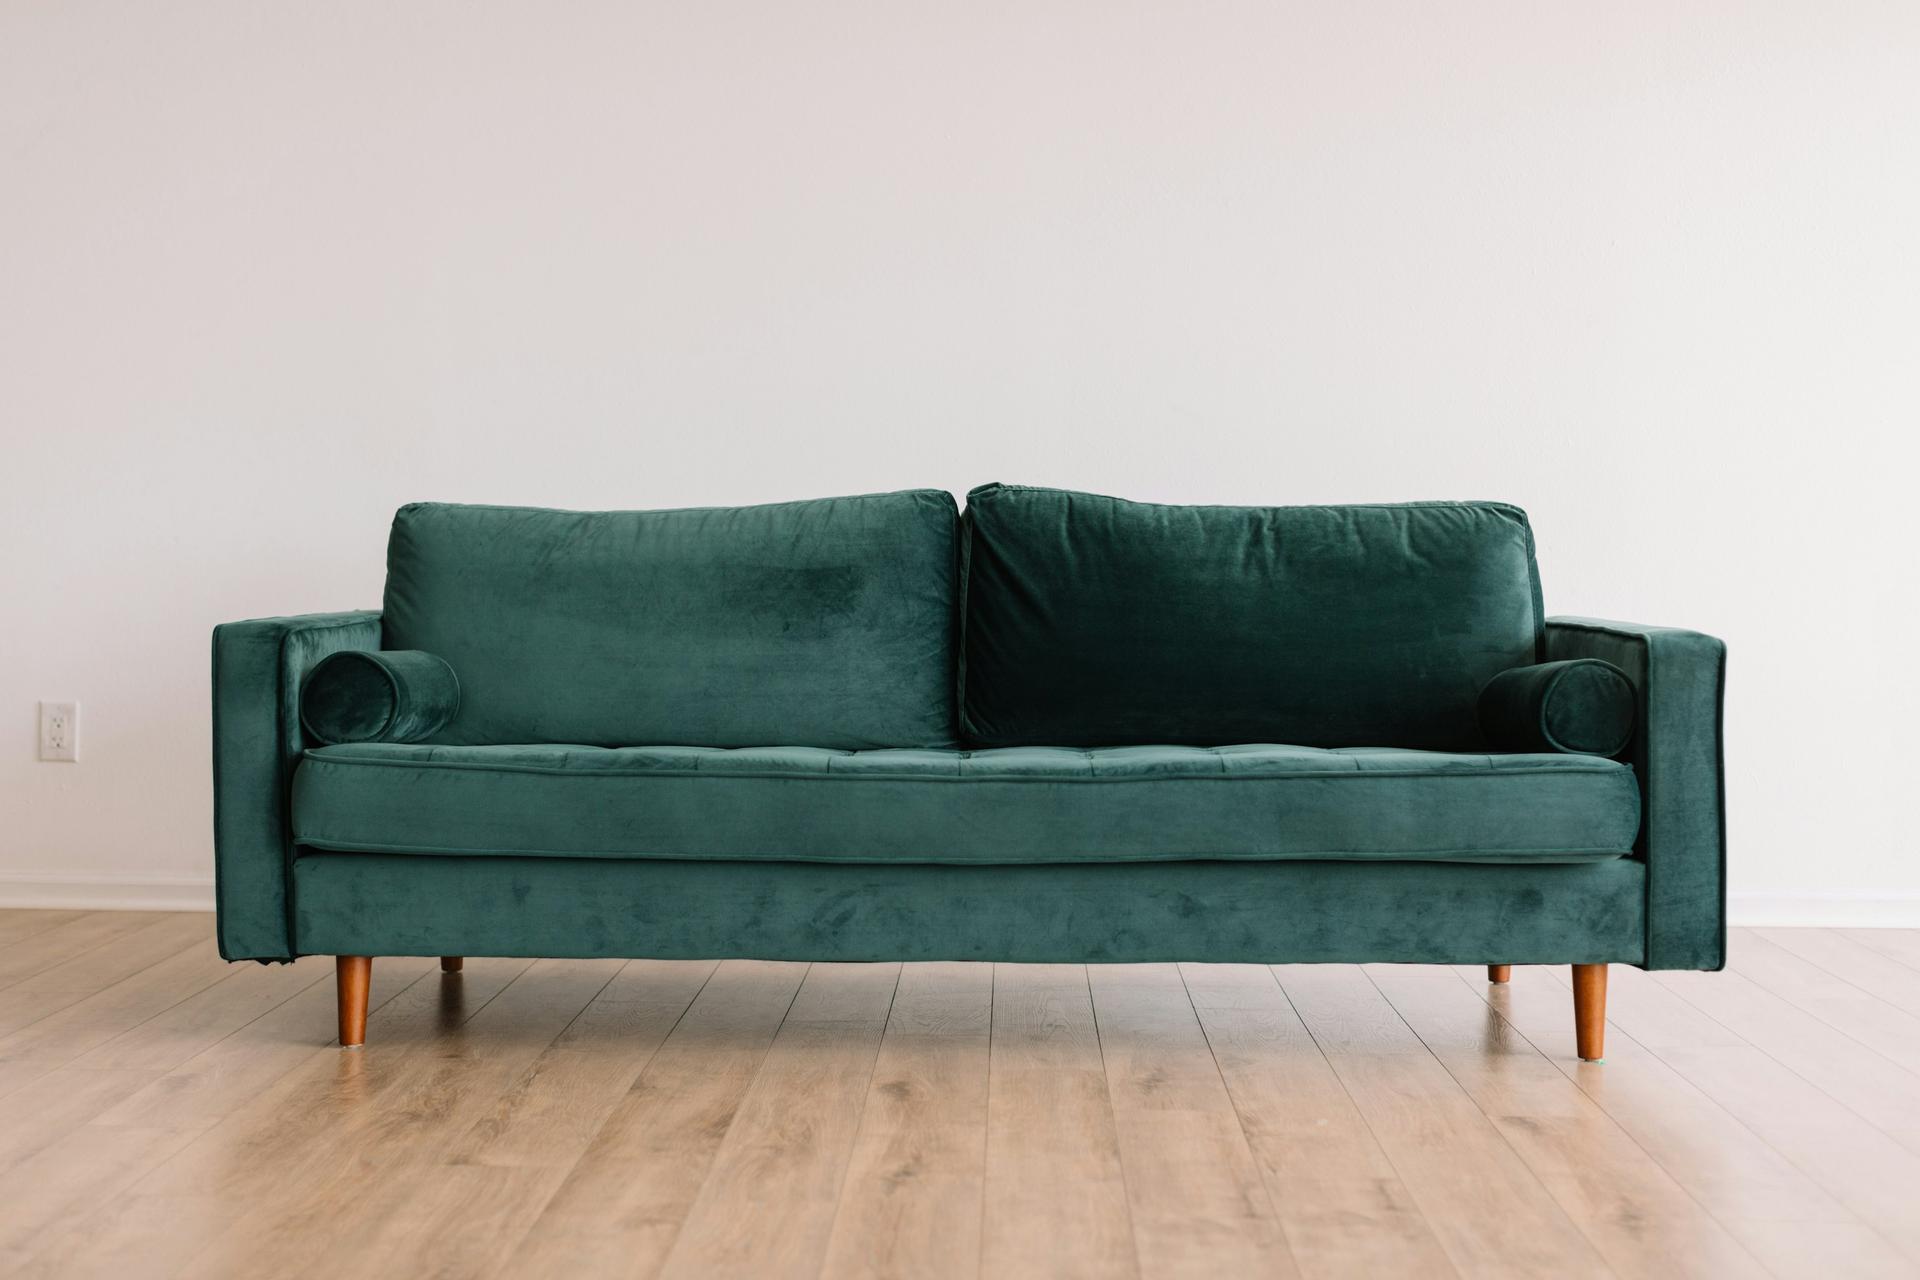 Emerald Green Sofa with Brown Wooden Legs - Elevate Your Living Space with Timeless Elegance